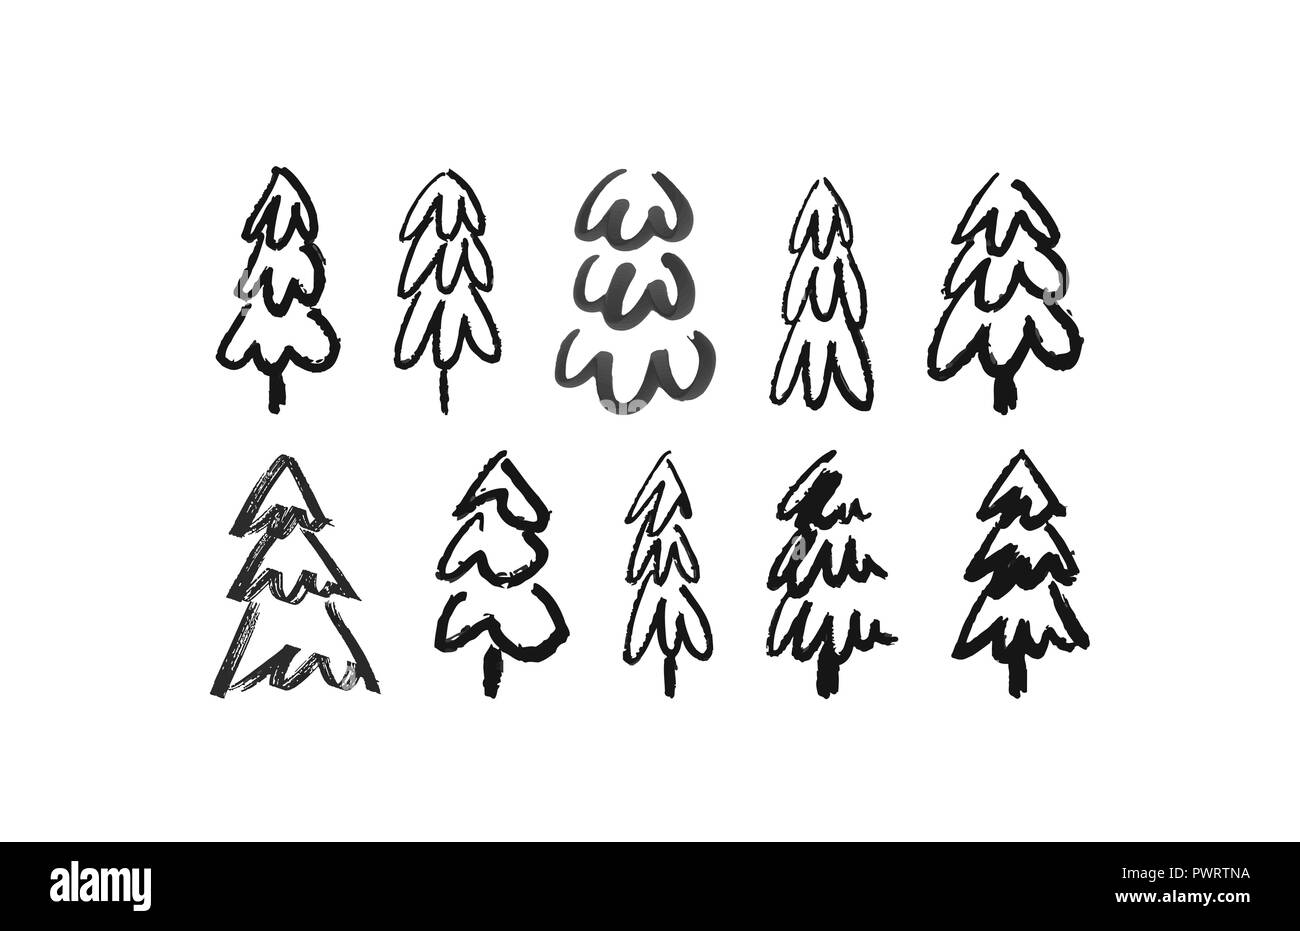 Christmas trees. Sketch a Doodle pine tree. Illustration hand drawn art. Stock Vector